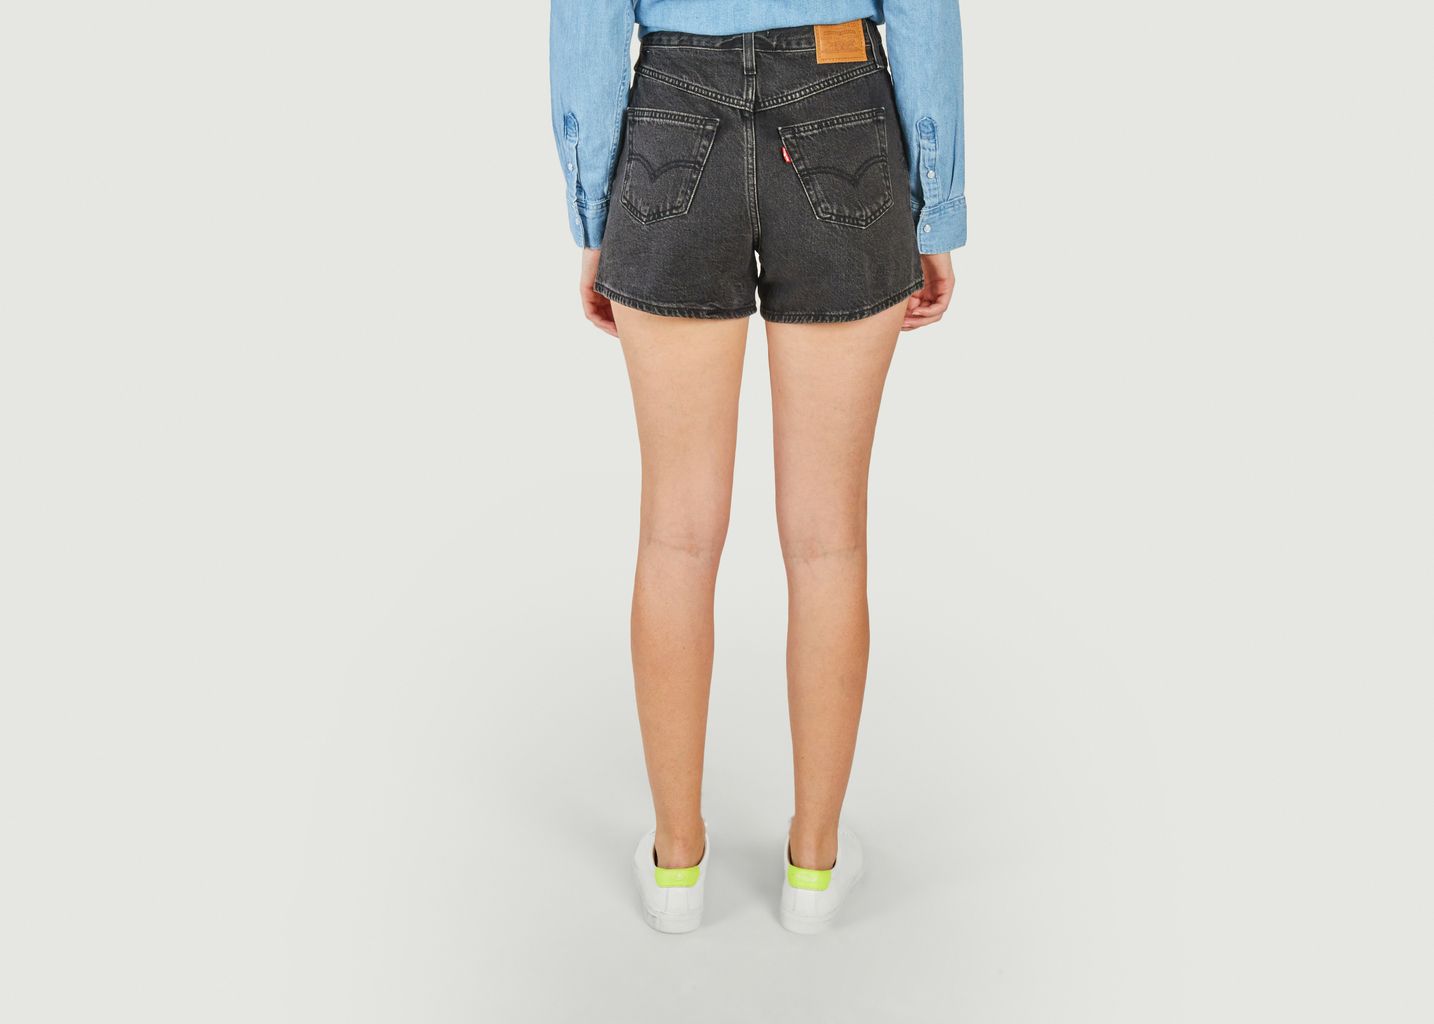 Mom 80's shorts - Levi's Red Tab